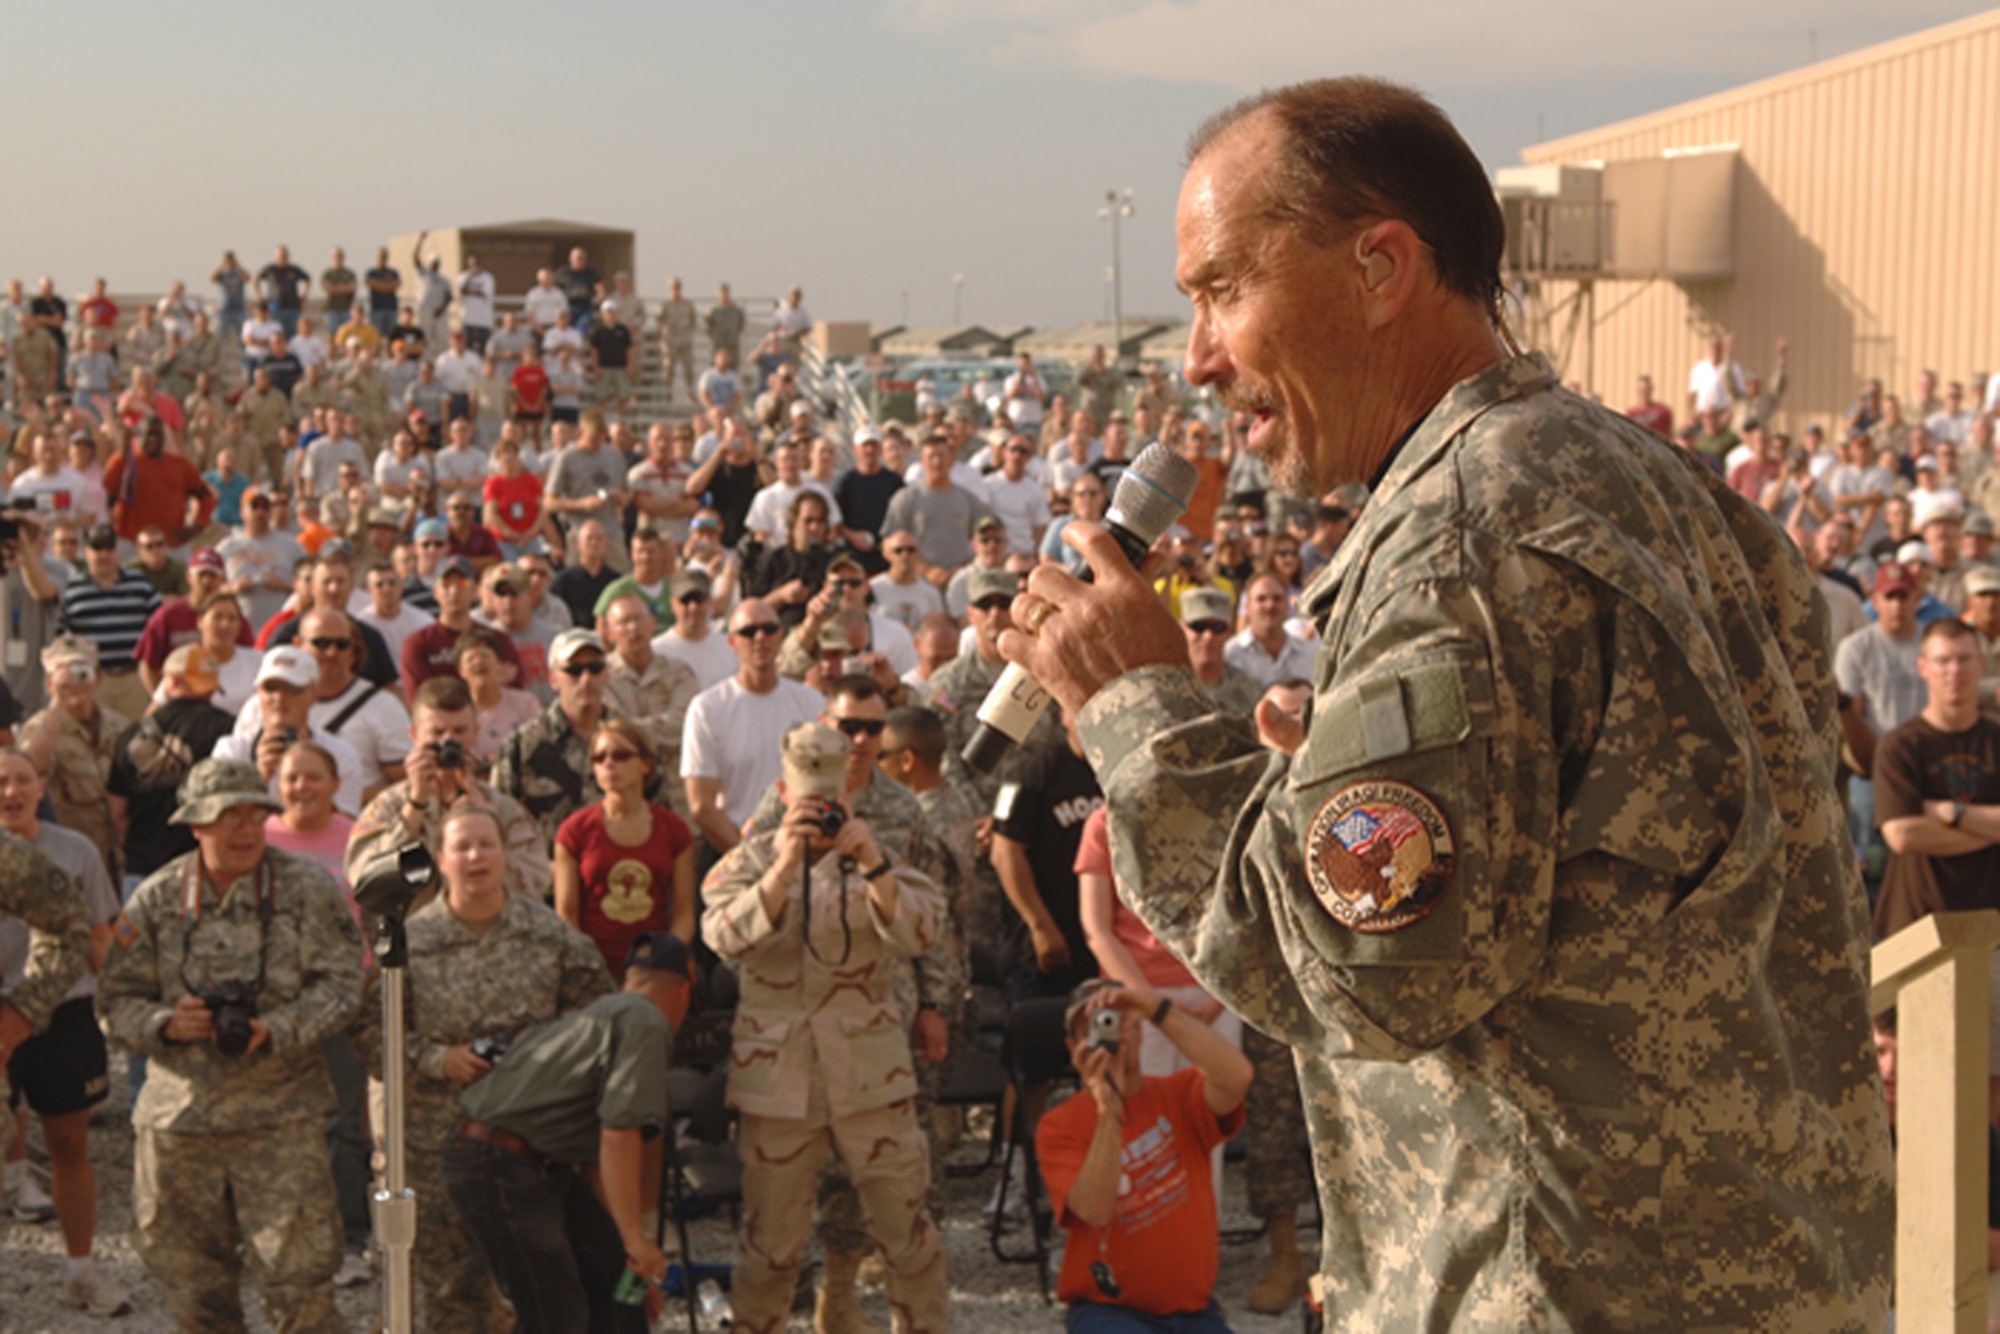 Lee Greenwood entertains the crowd during the Patriotic World Tour's third performance stop in Southwest Asia. The tour is sponsored by Air Force Reserve Command. (U.S. Air Force photo/Ken Hackman)

